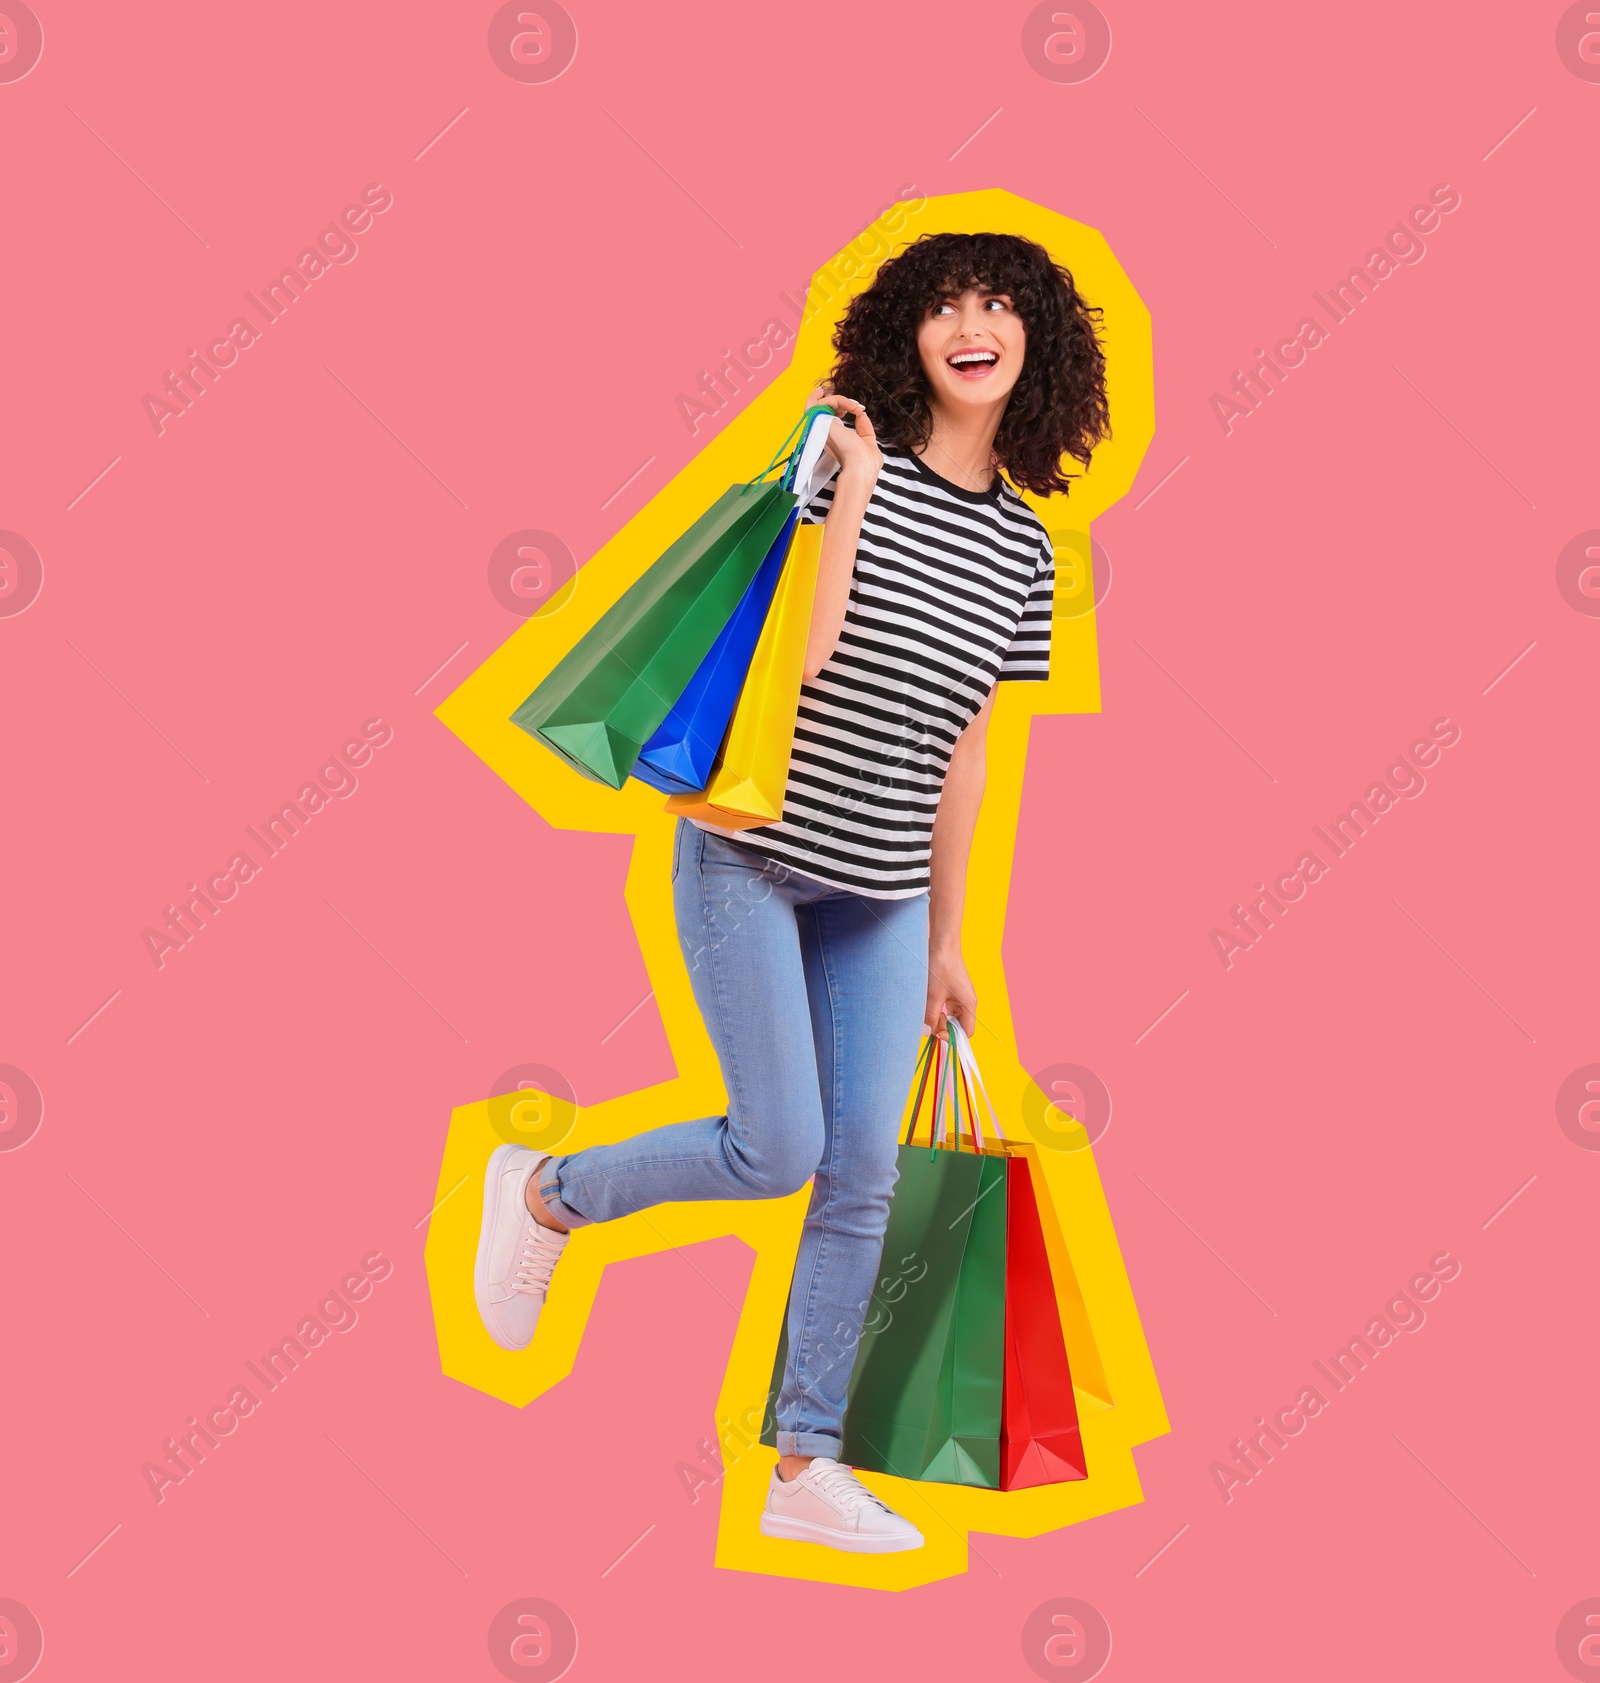 Image of Happy woman with shopping bags on pink background